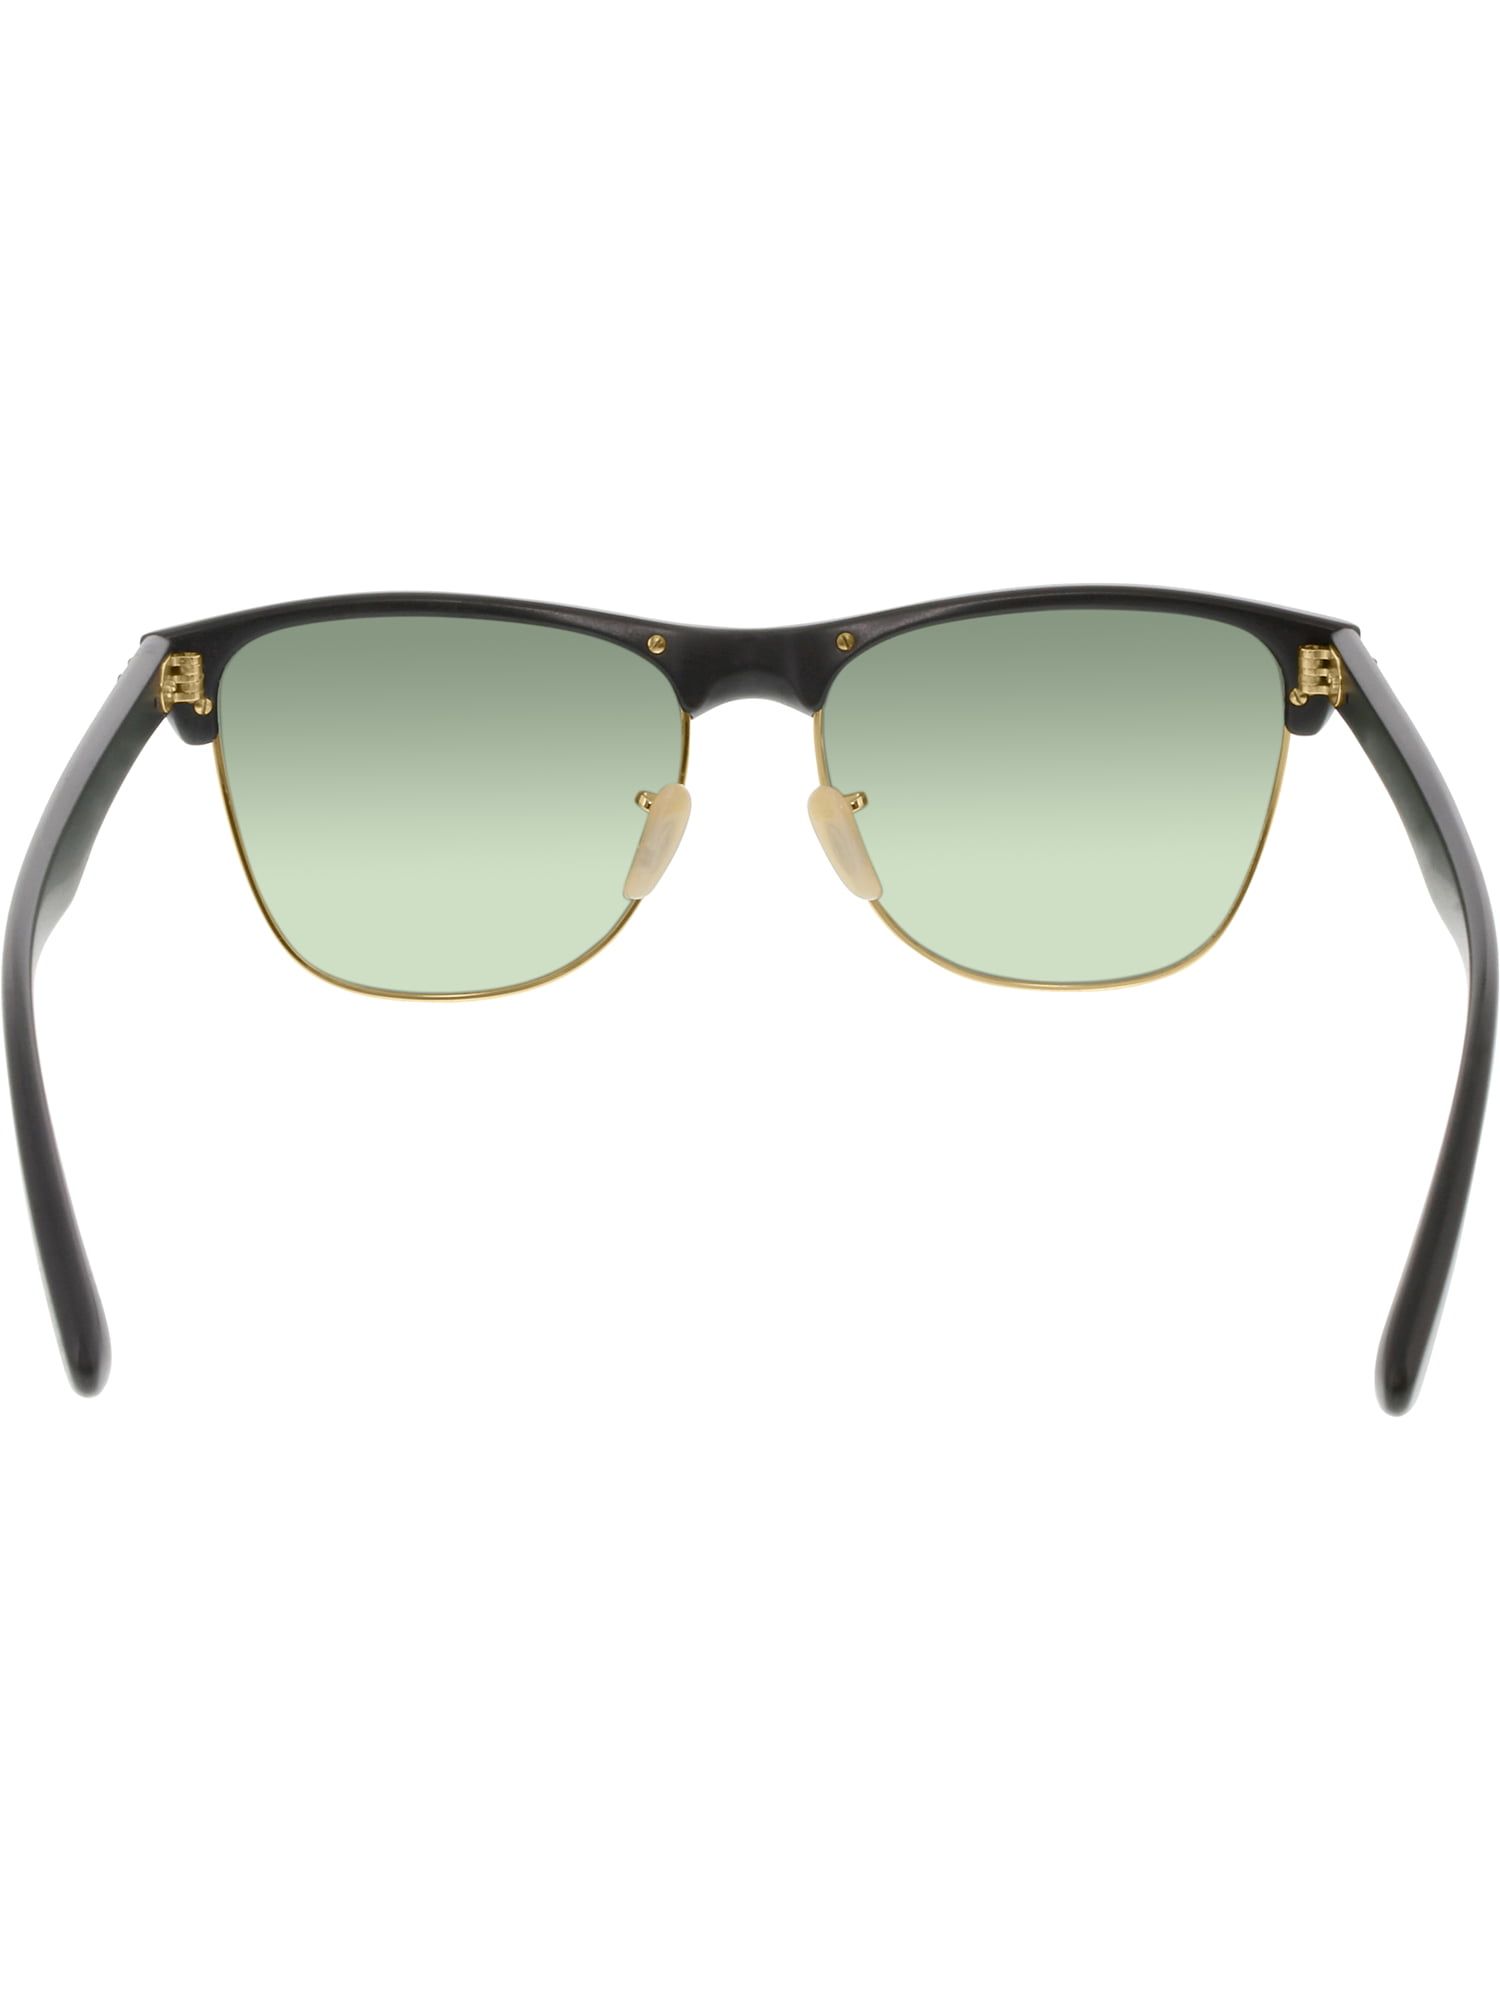 Ray Ban Clubmaster Oversized Canada Up To 75 Off Free Shipping